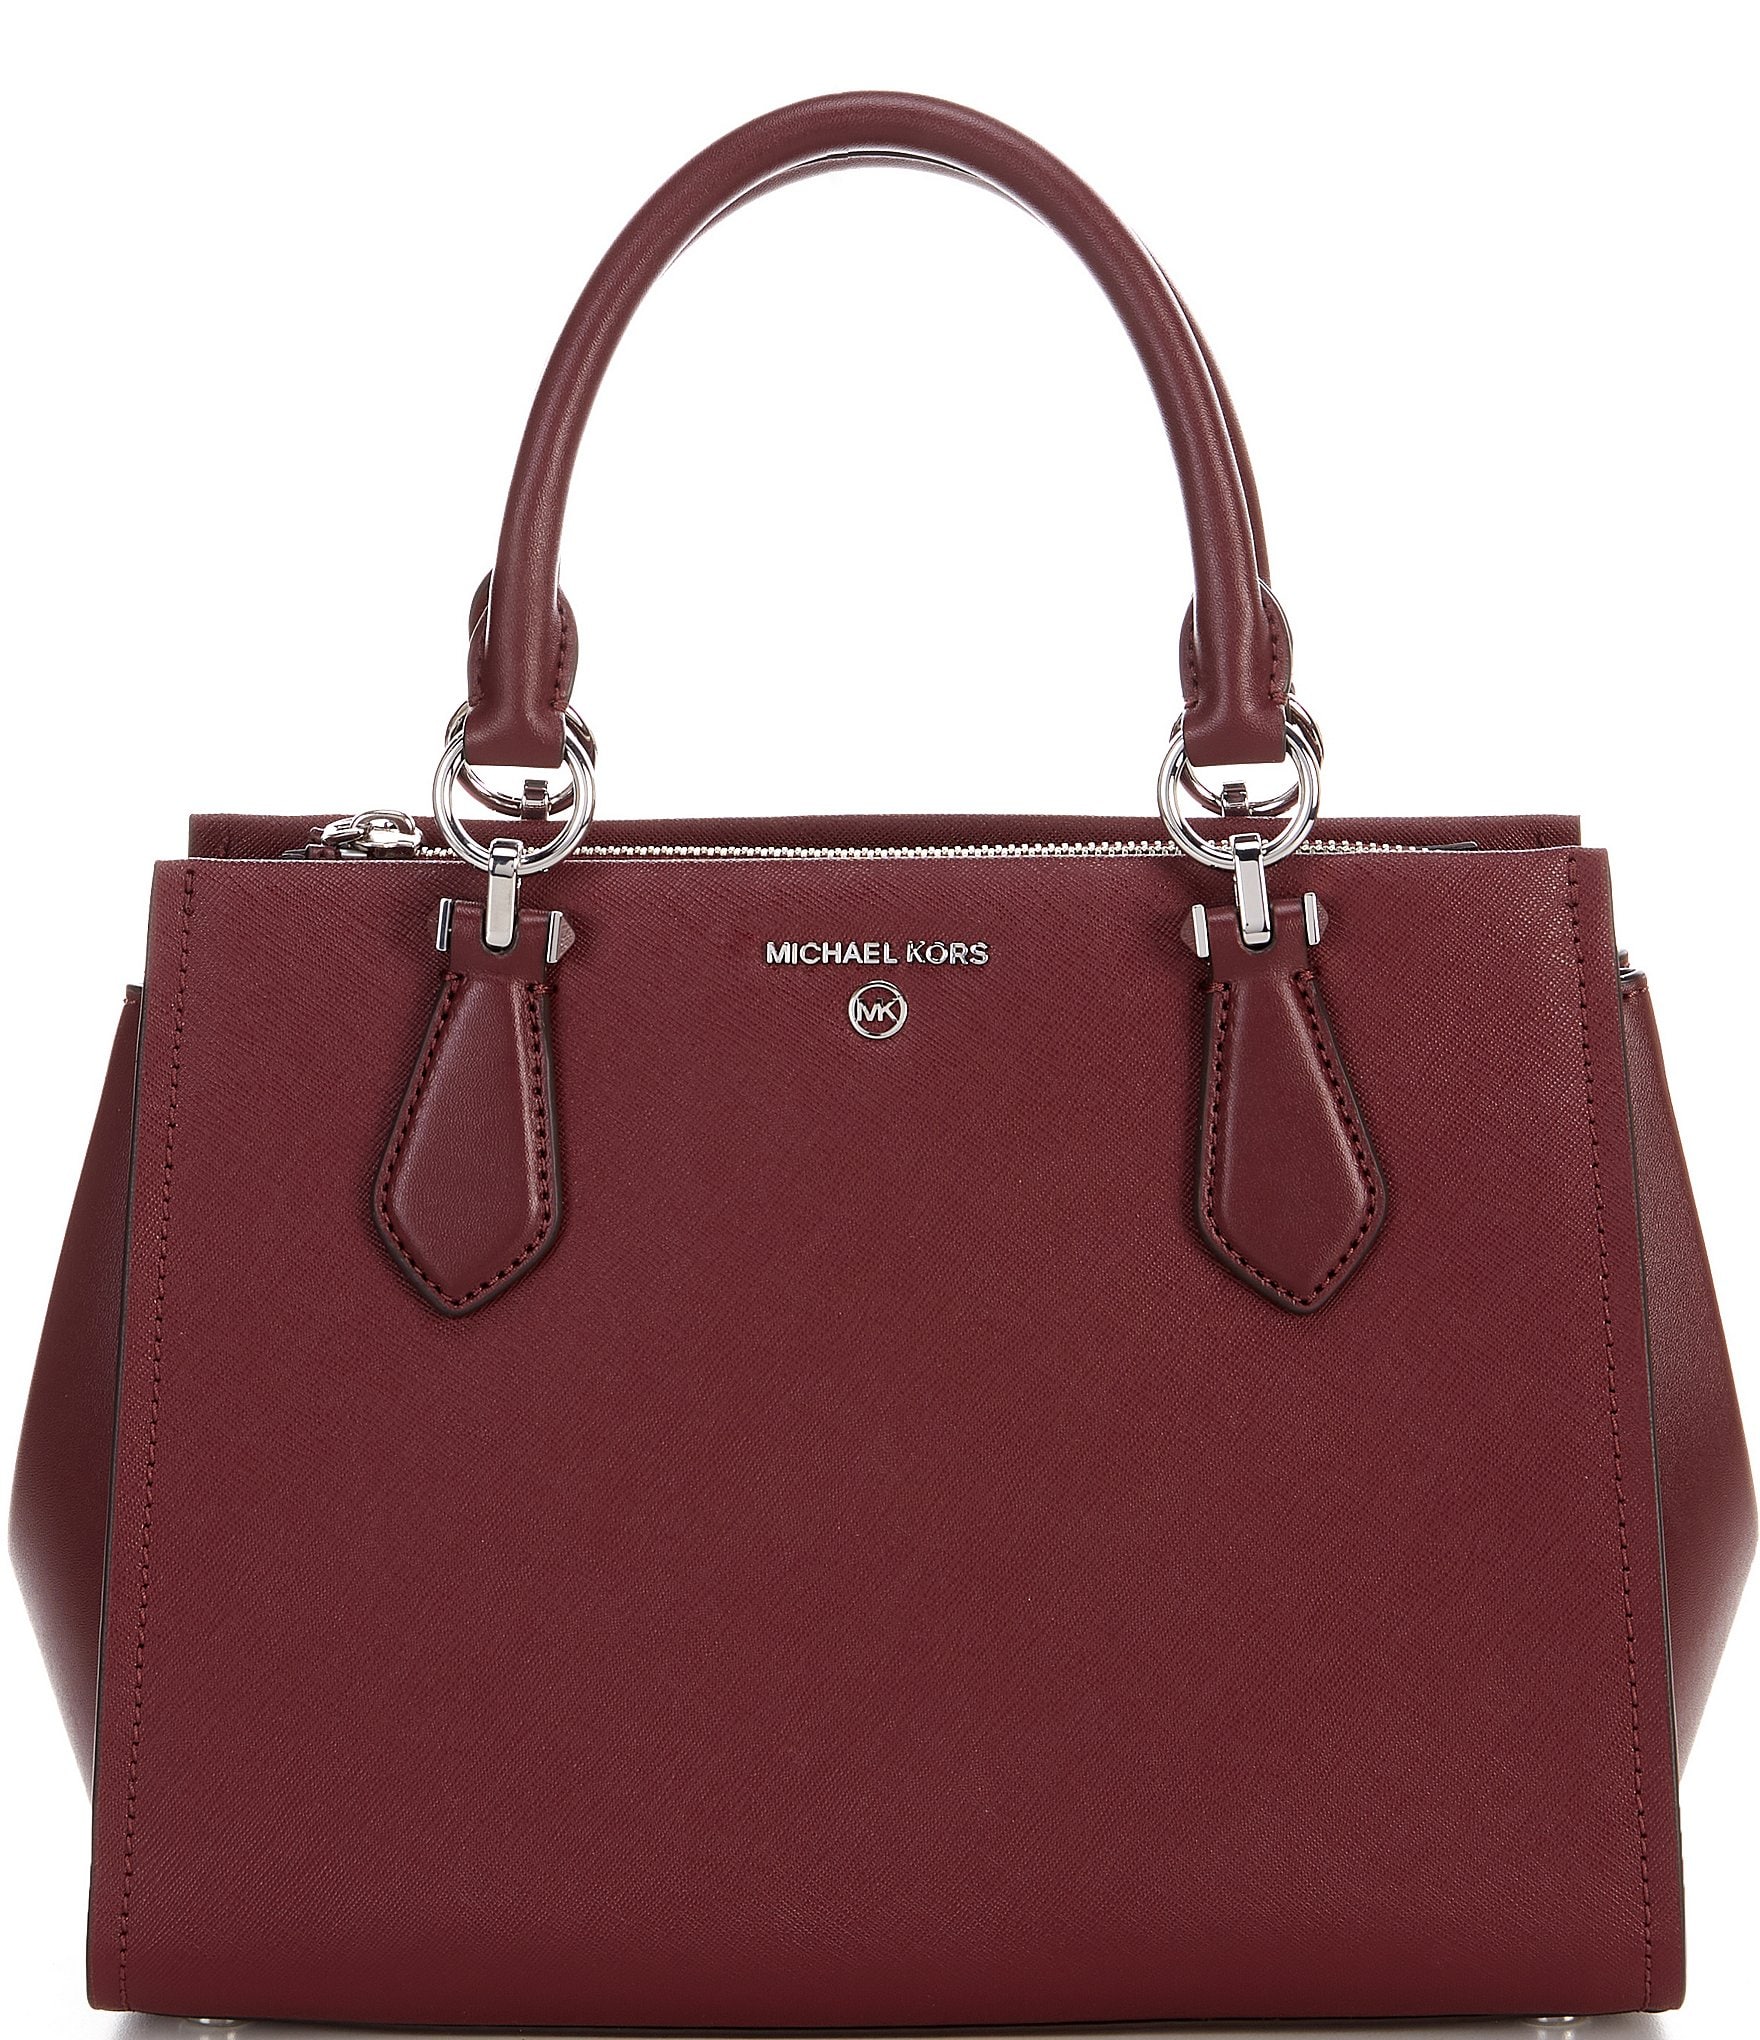 MICHAEL KORS MD MARILYN SATCHEL BAG IN SAFFIANO LEATHER Woman Camel